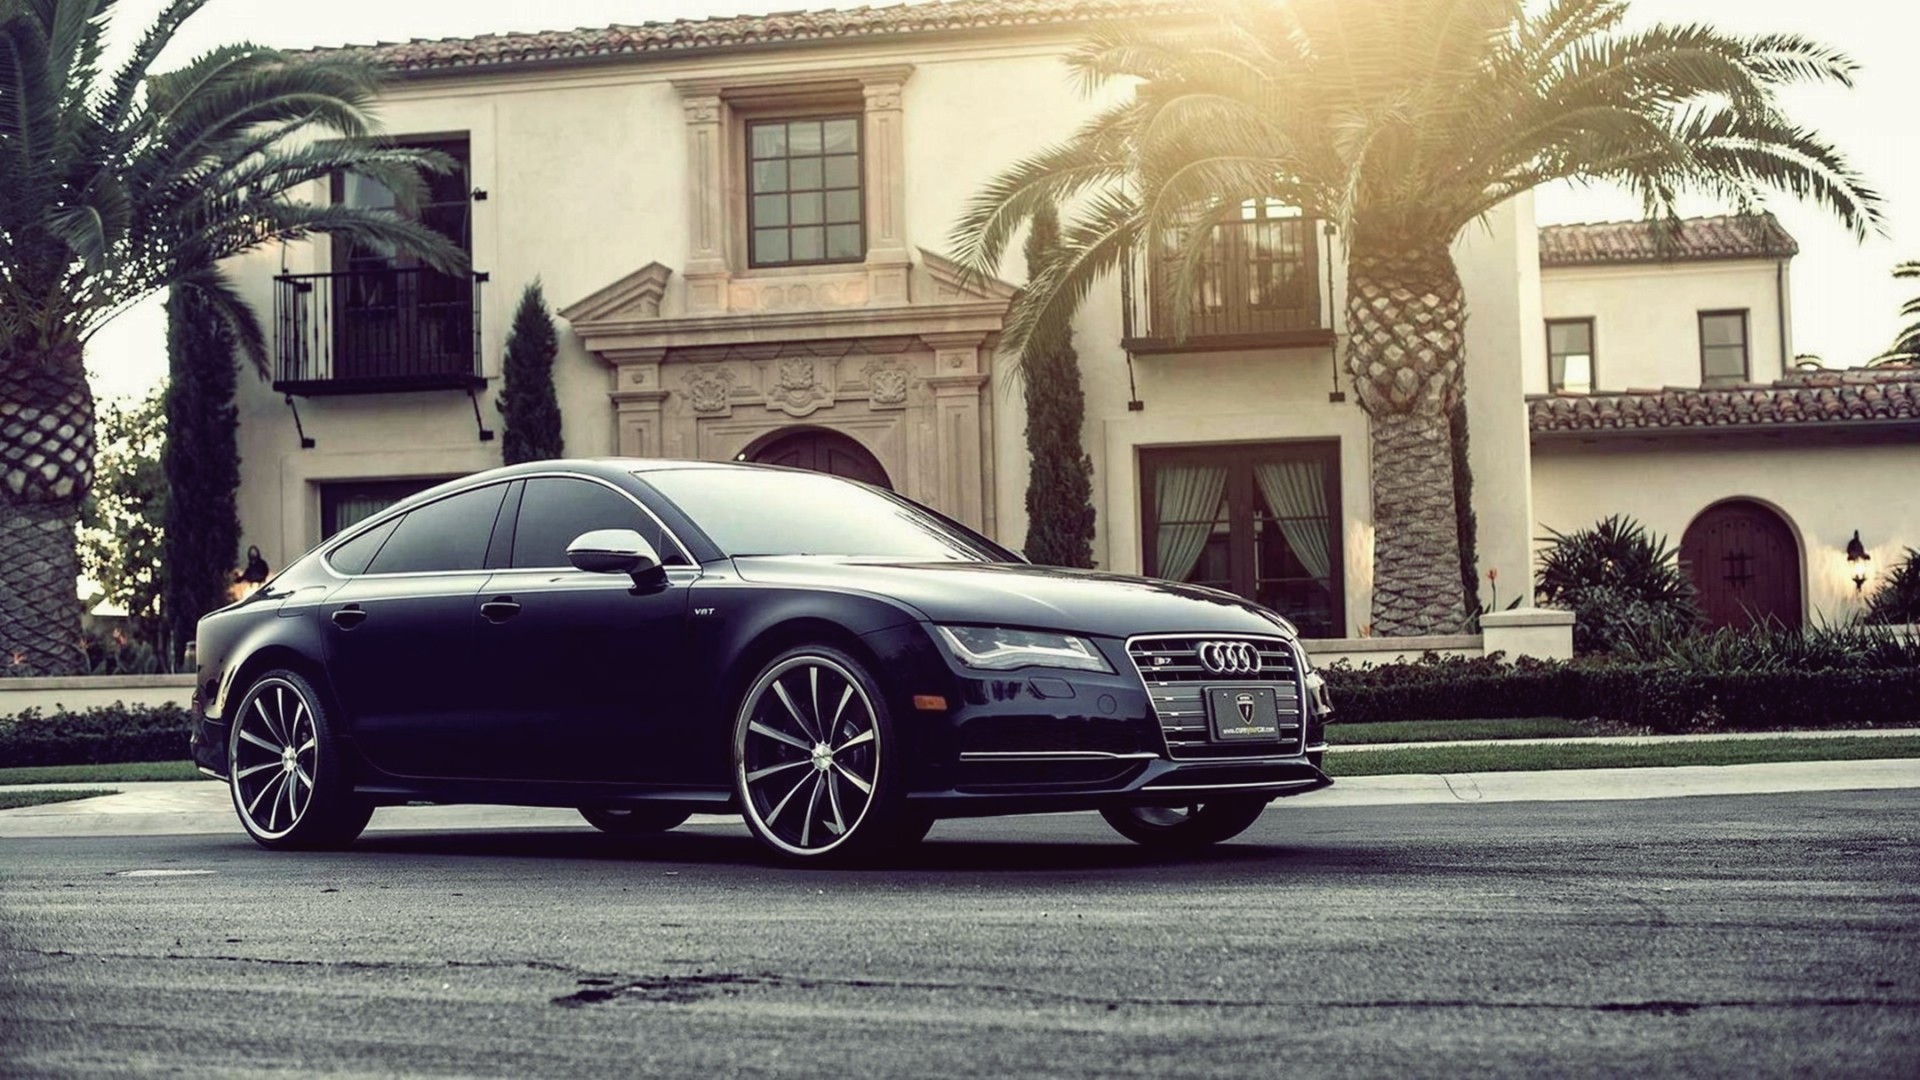 Audi A7 Wallpapers, Full Hdq Audi A7 Pictures And Wallpapers - Hd Wallpaper Audi - HD Wallpaper 